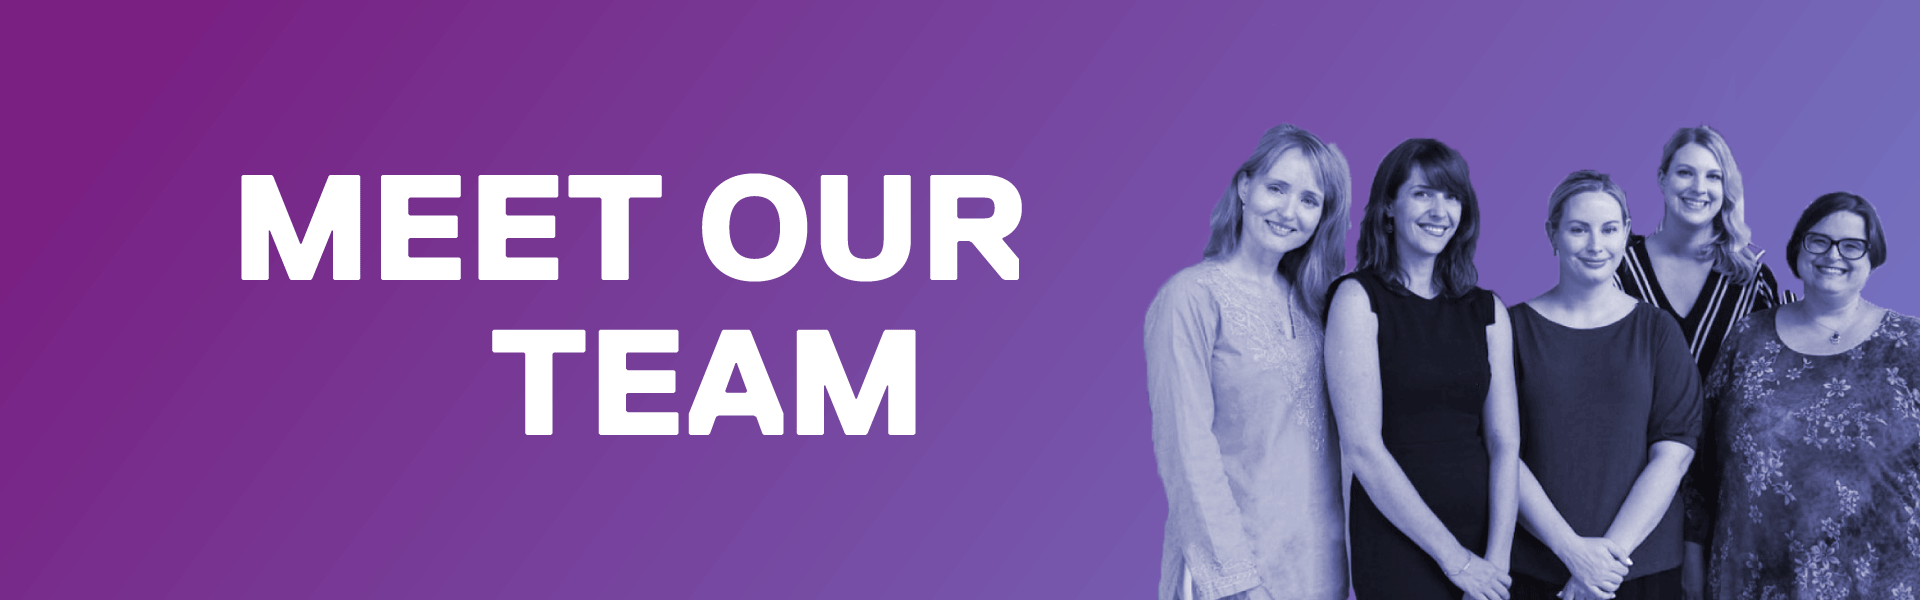 Meet Our Team is written on a purple gradient with a team of 5 people is on the right